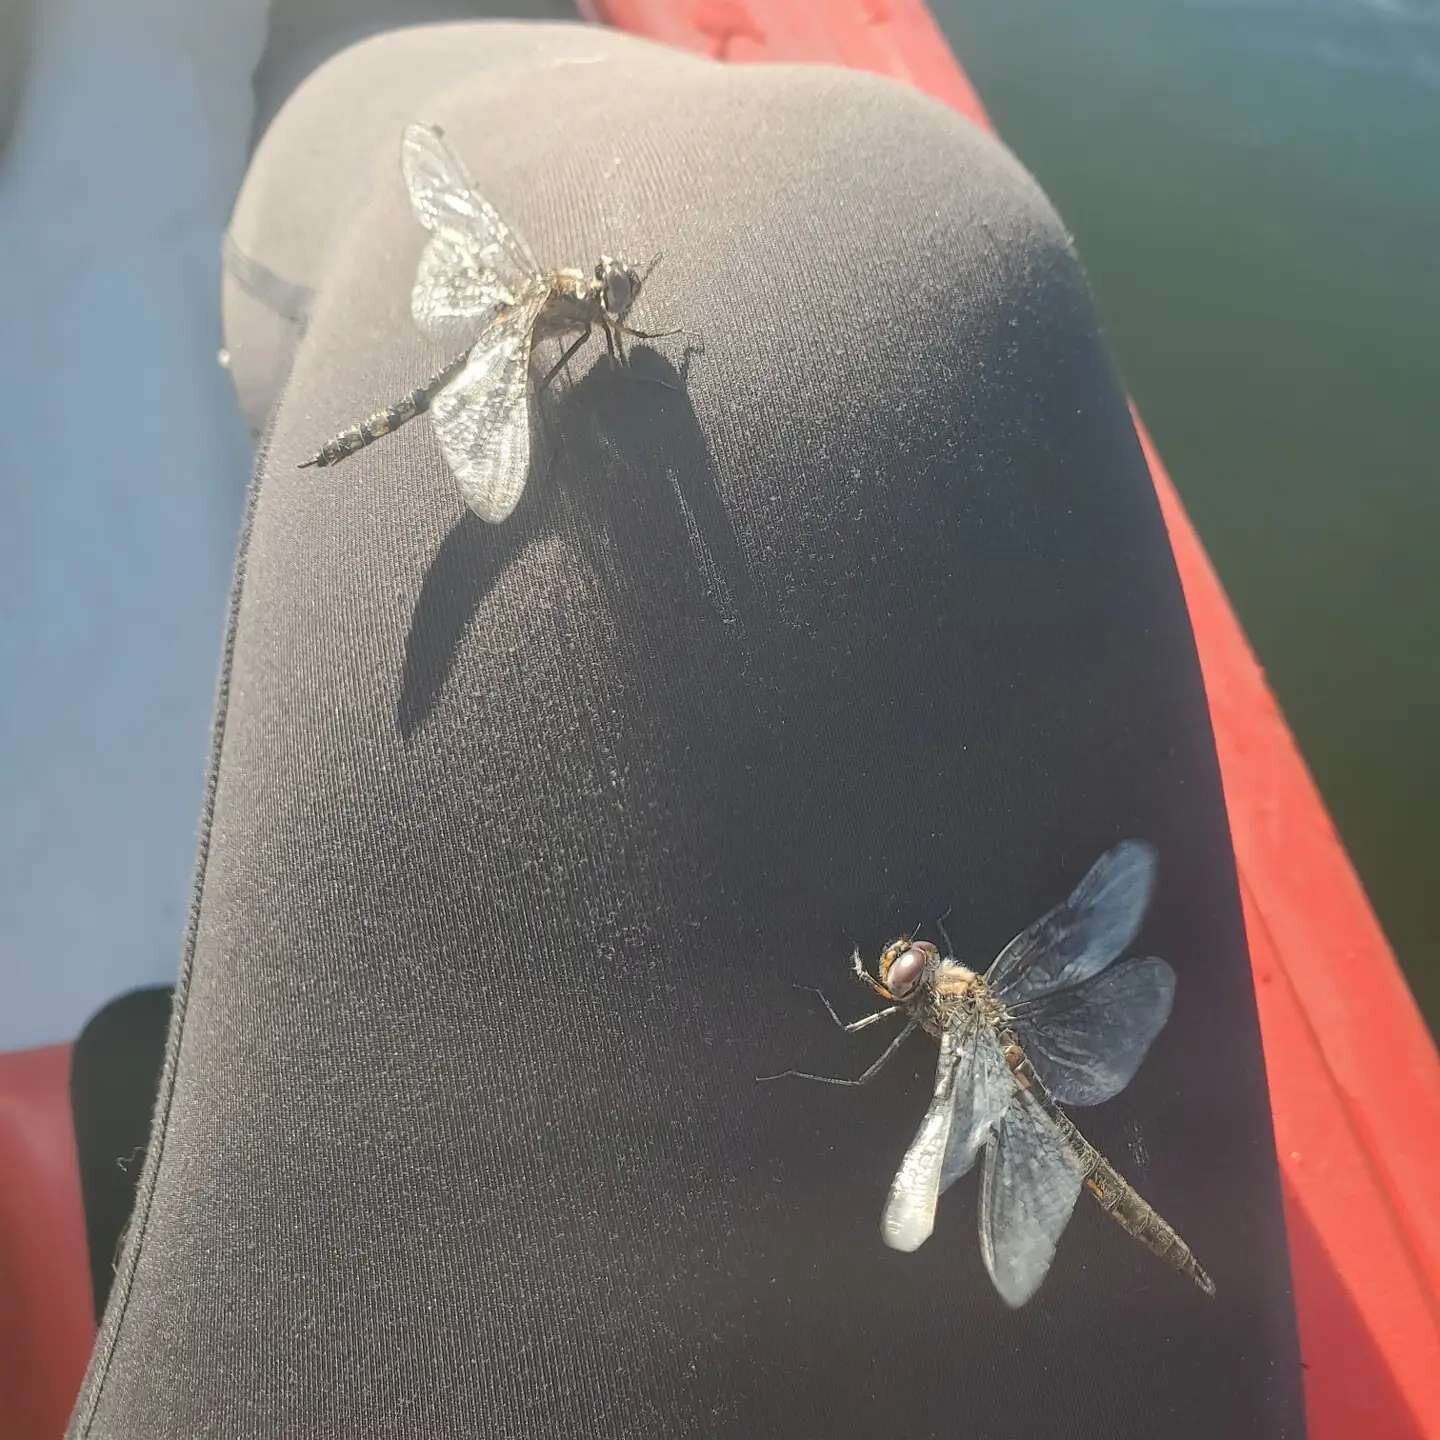 When you save all the dragonflies in Spruce Coulee 🐉🪰

#KayakMedicineHat #KayakRental #OutdoorXcape #GetOutside #GetOffTheCouch #MyMHSummer